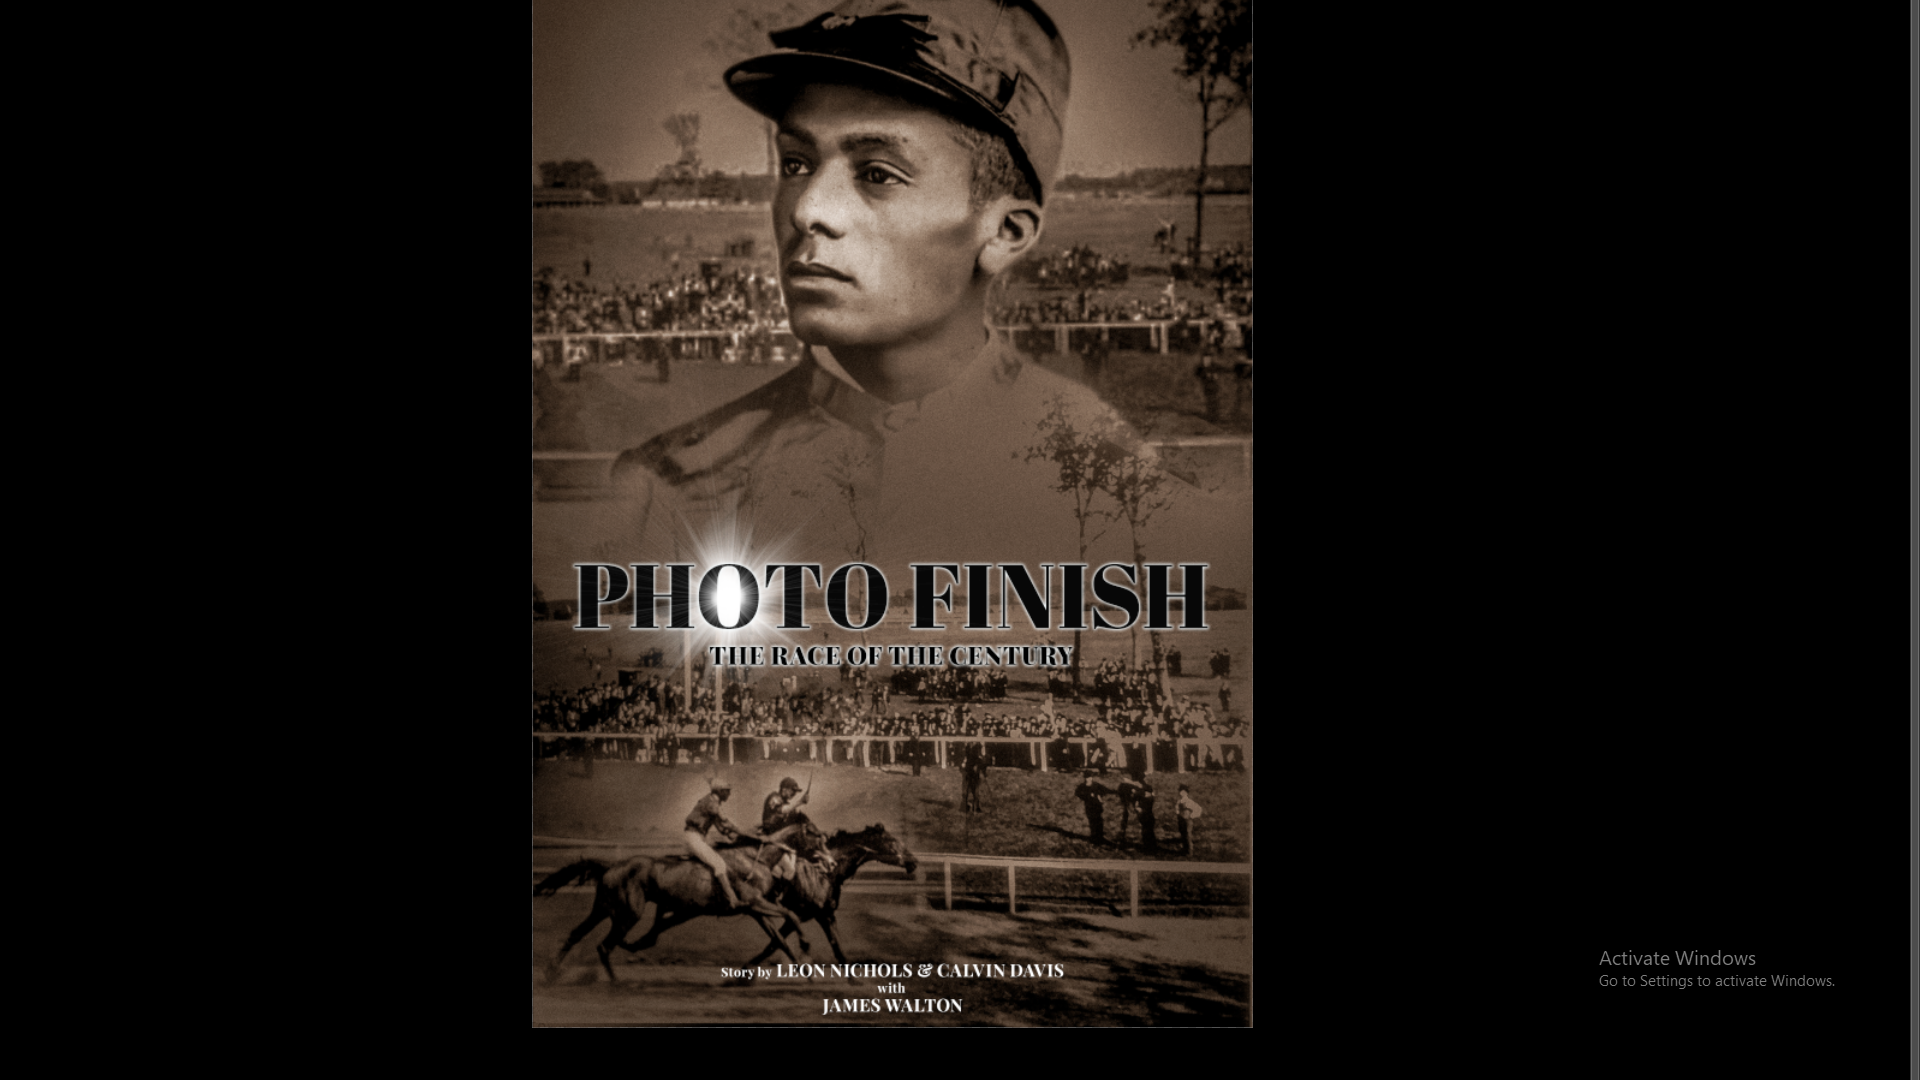 Black Horseracing Film Poised to Finish First